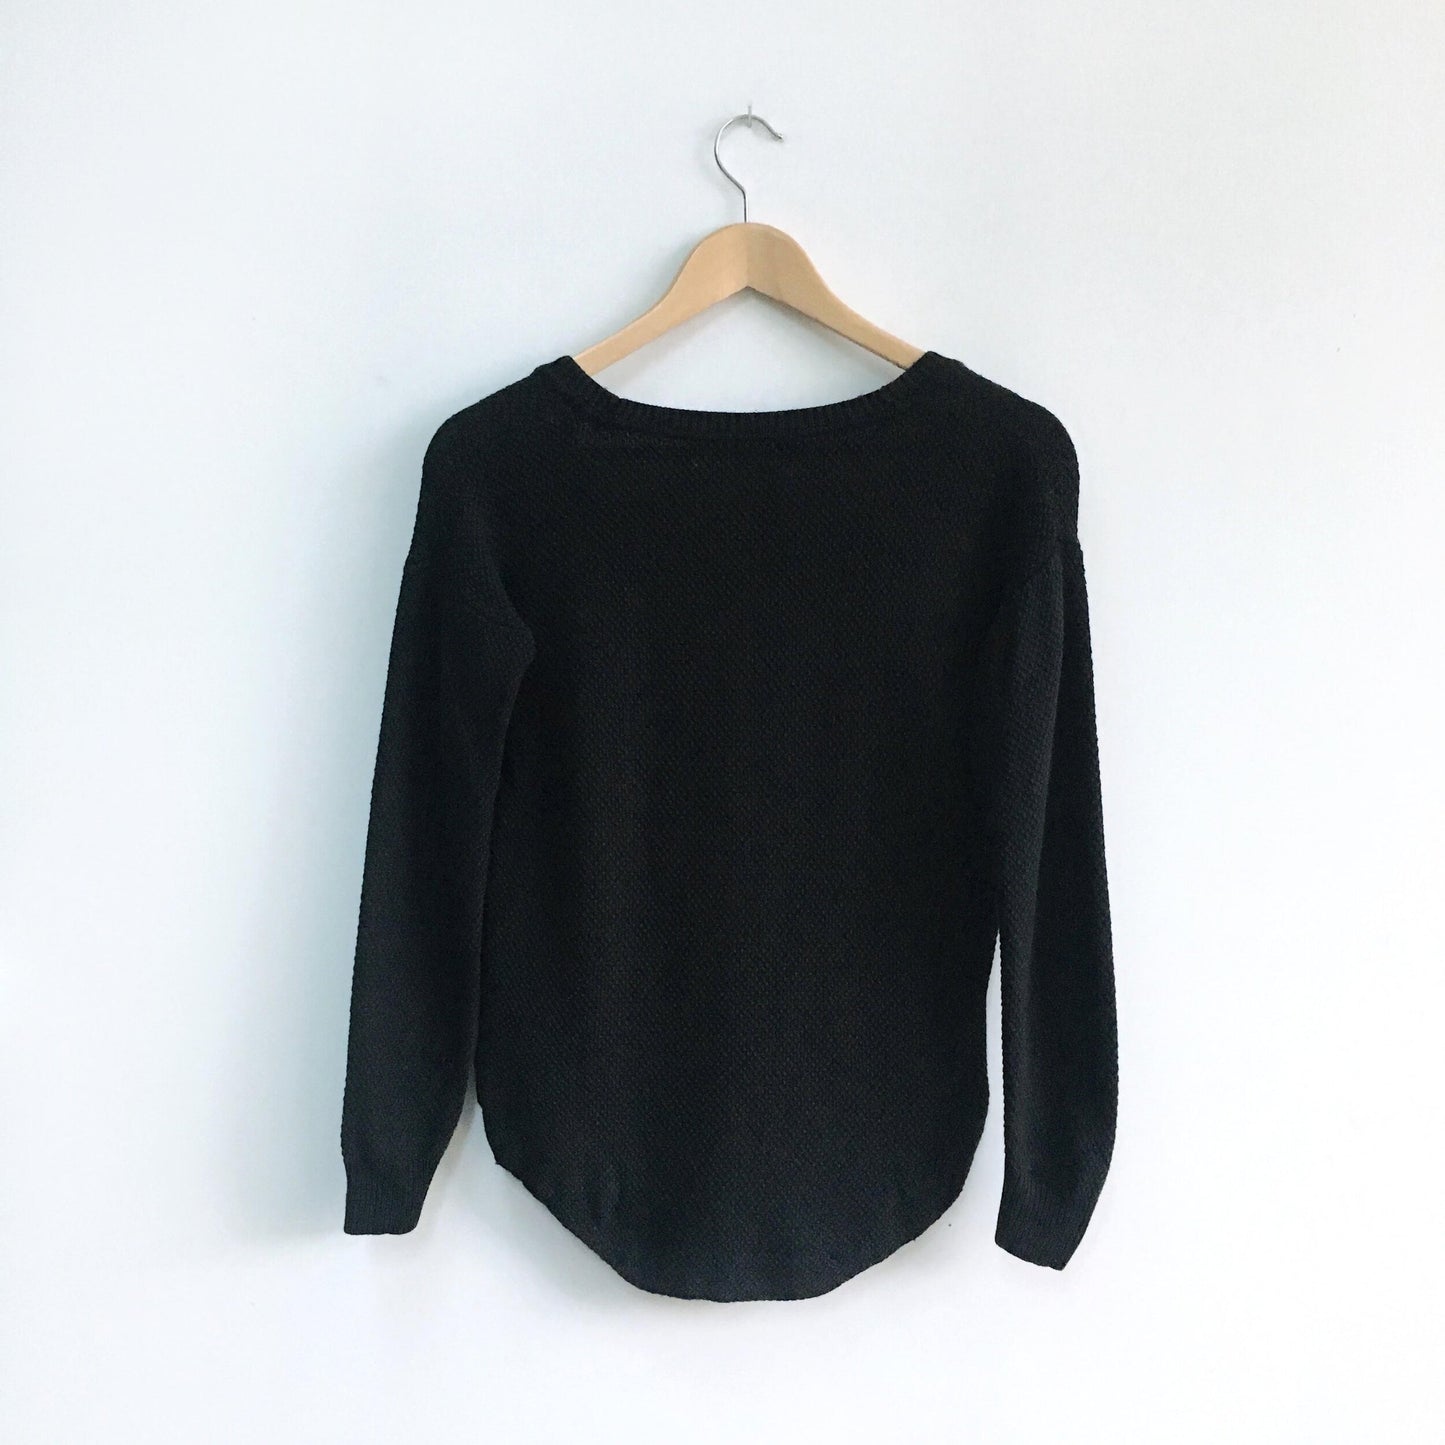 Wilfred Galois Sweater - size xxs